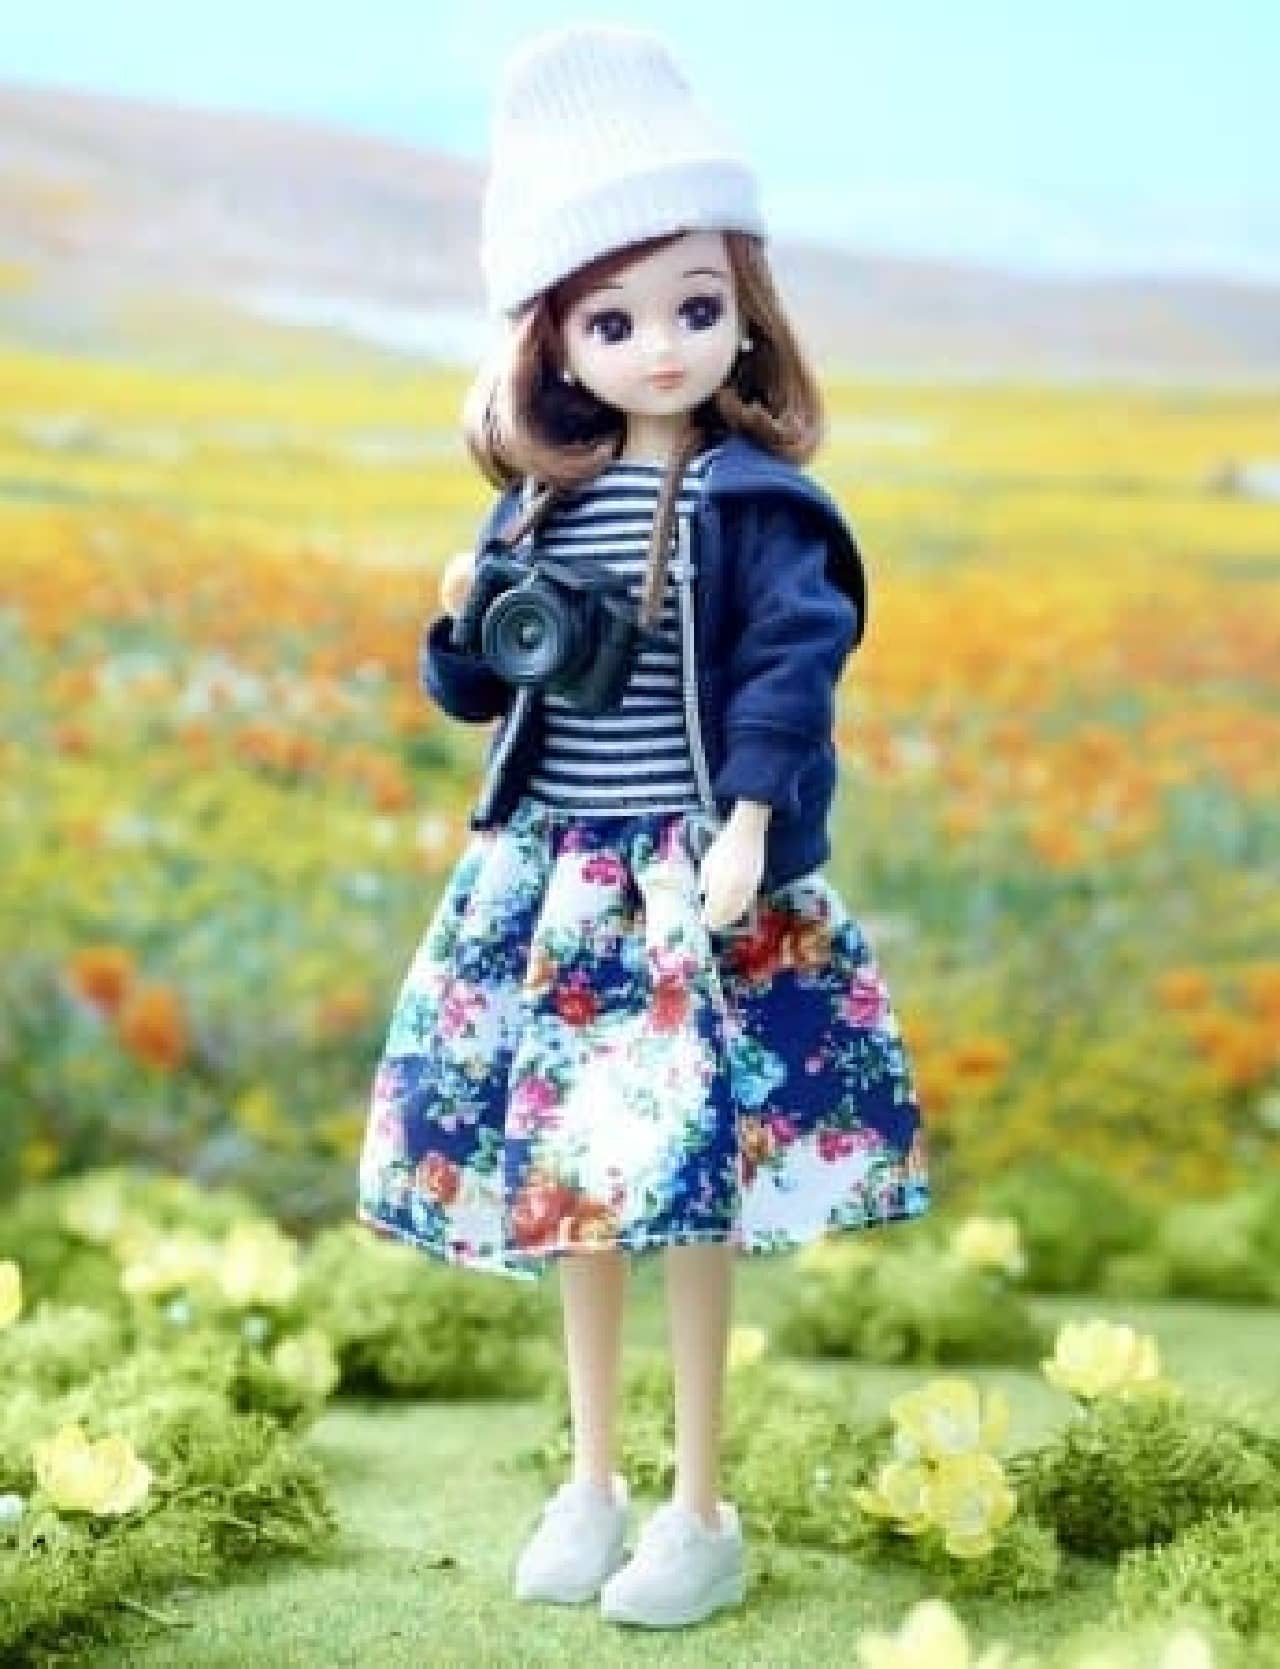 Takara Tomy "LiccA Stylish Doll Collections" 4th